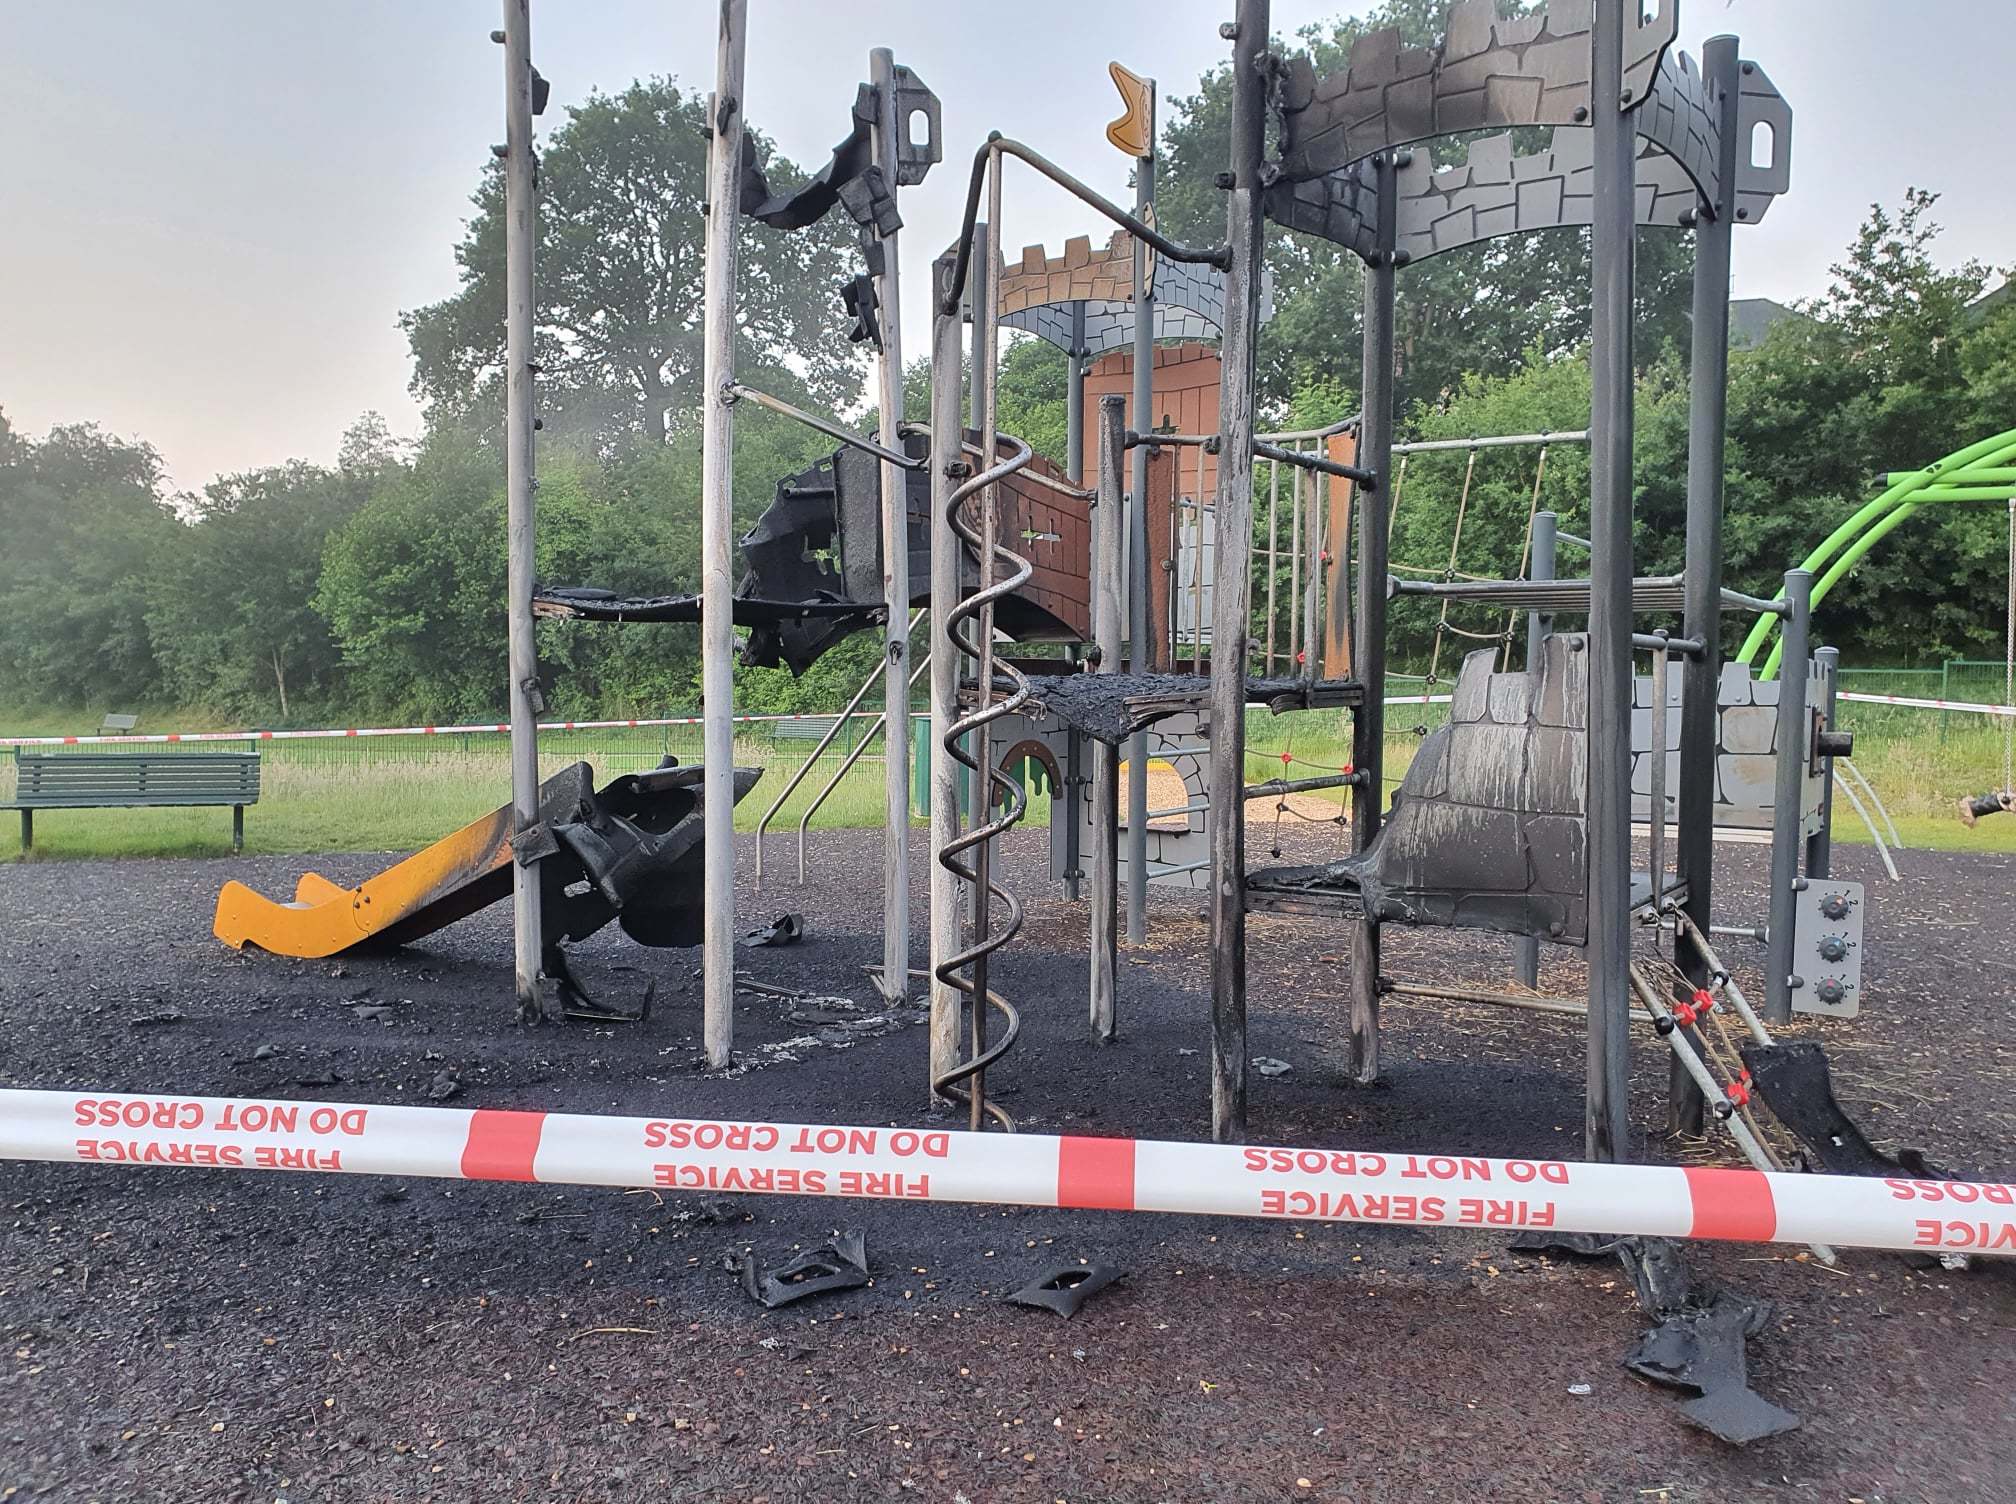 Fire destroys Daisy Dip play park in Swaythling. Photo taken by Councillor Lorna Fielker.